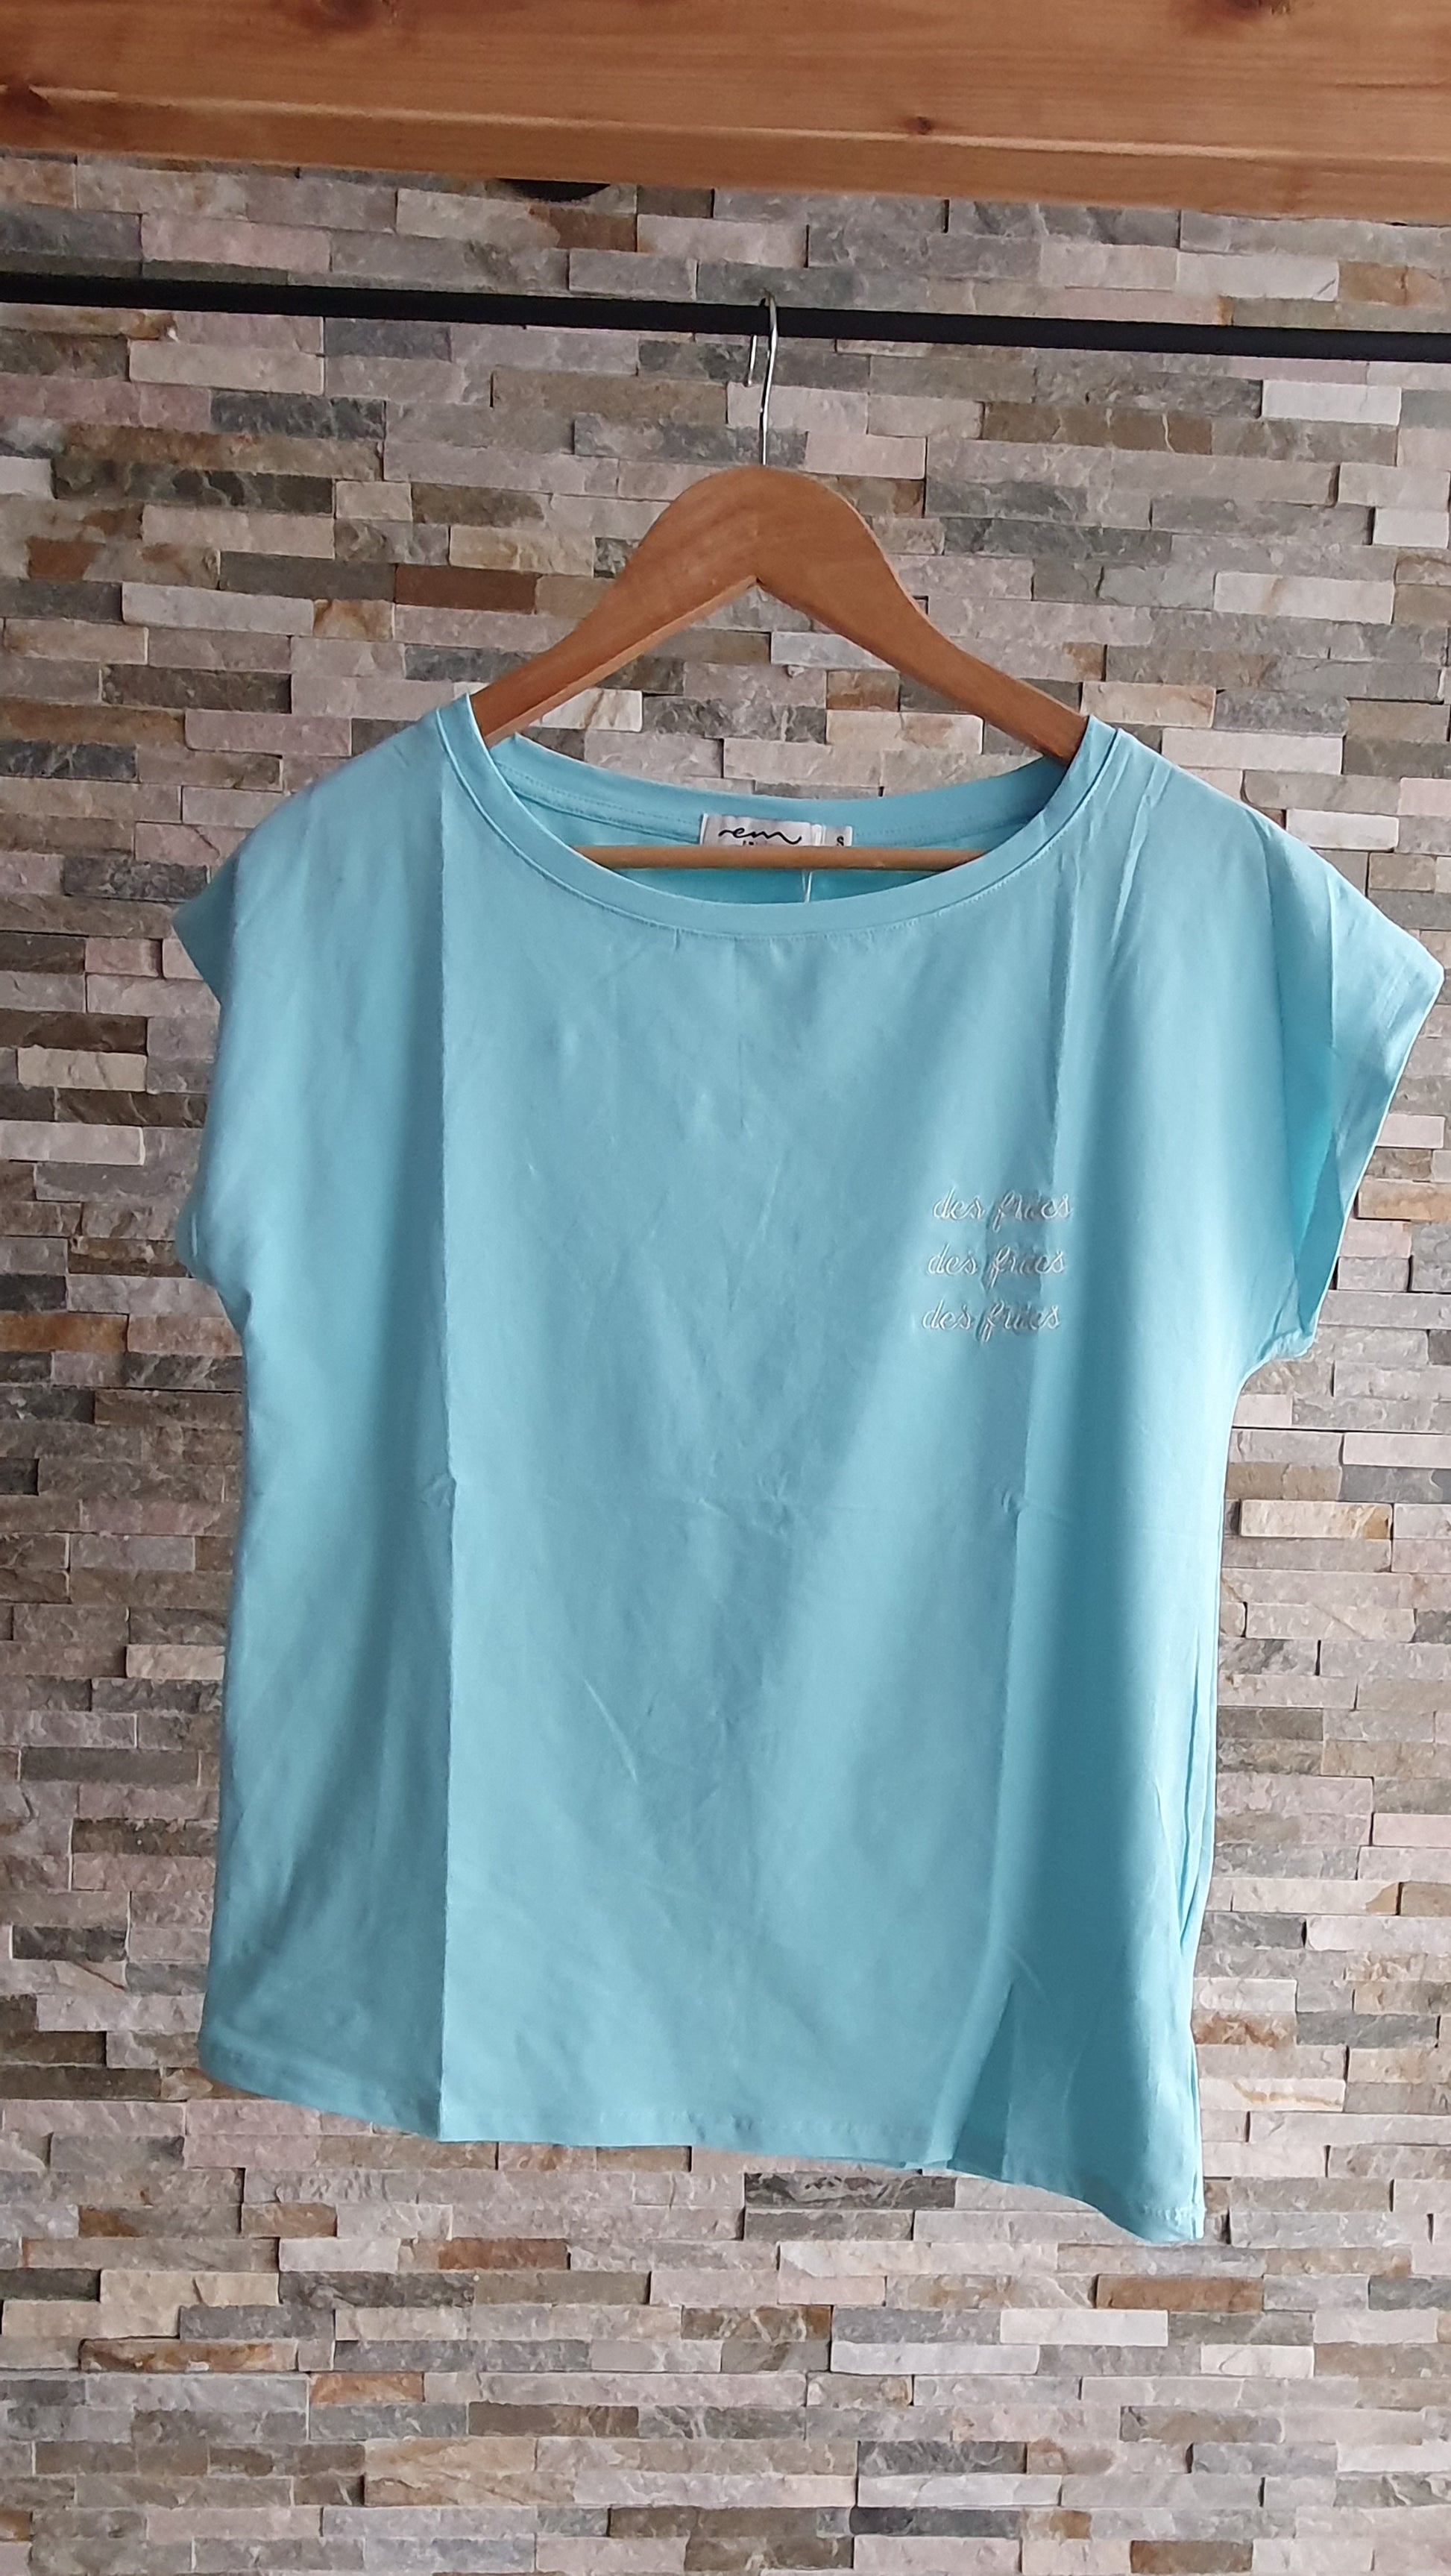 Tee-shirt turquoise comprenant des inscriptions : des frites , des frites , des frites